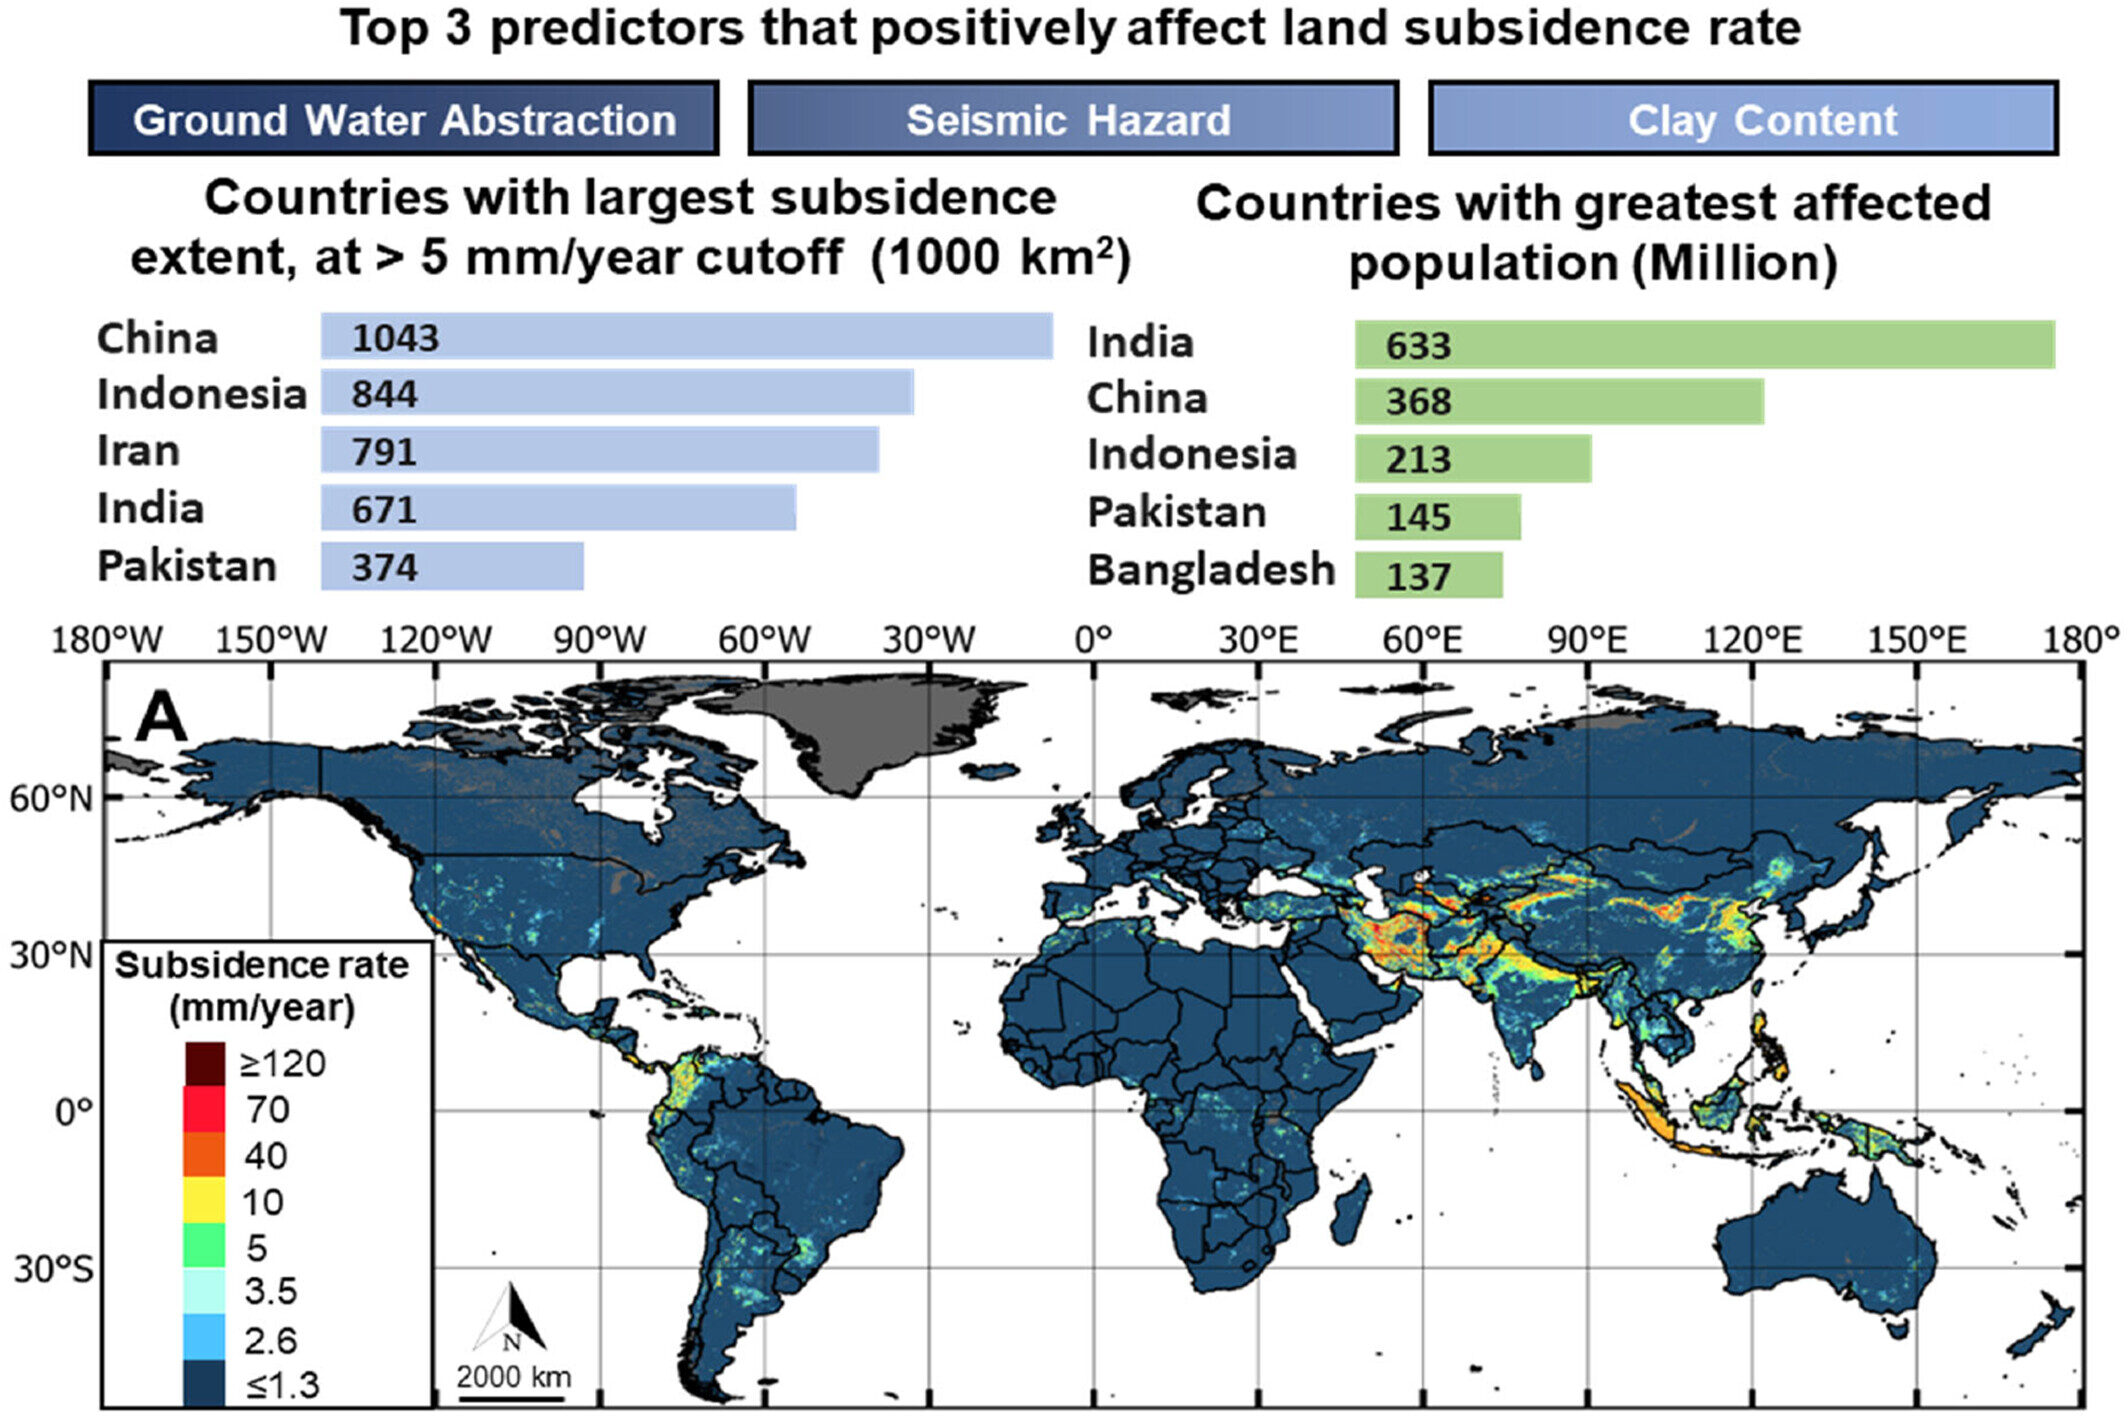 Map shows global prediction of land subsidence, with relevant feature importance and zonal statistics at the top of the figure. Modeled subsidence rates for the entire globe (a), zoomed-in maps of land subsidence for North America (b), South America (c), Europe and North Africa (d), Middle East (e), and South, East, and South-East Asia (f).